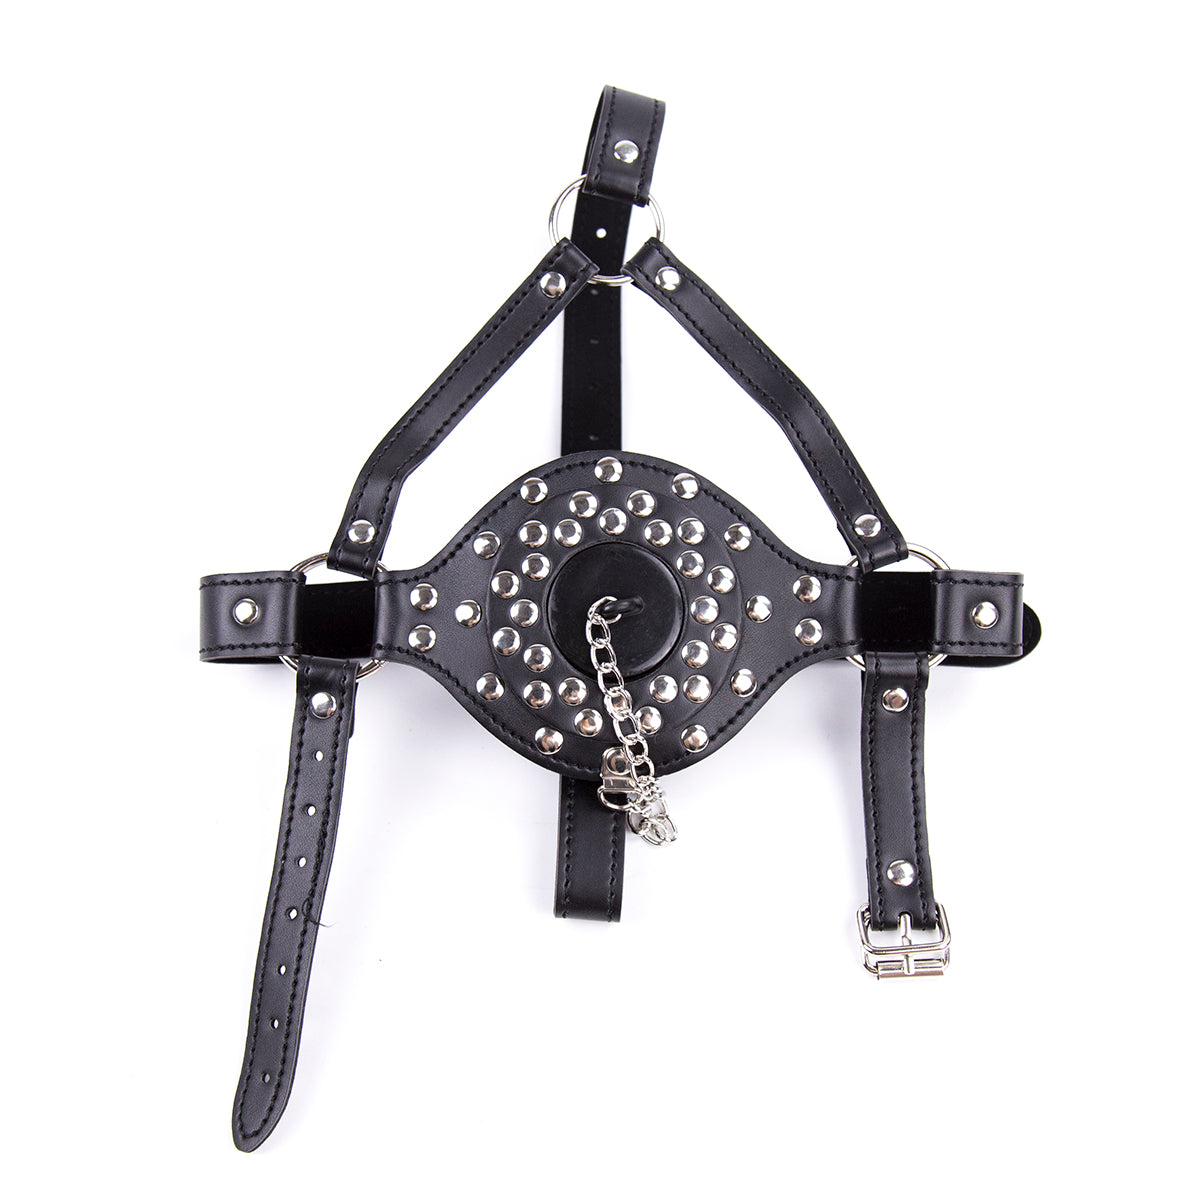 BDSM Bondage Mouth Opener Cover Cup Full Head Harness - Black